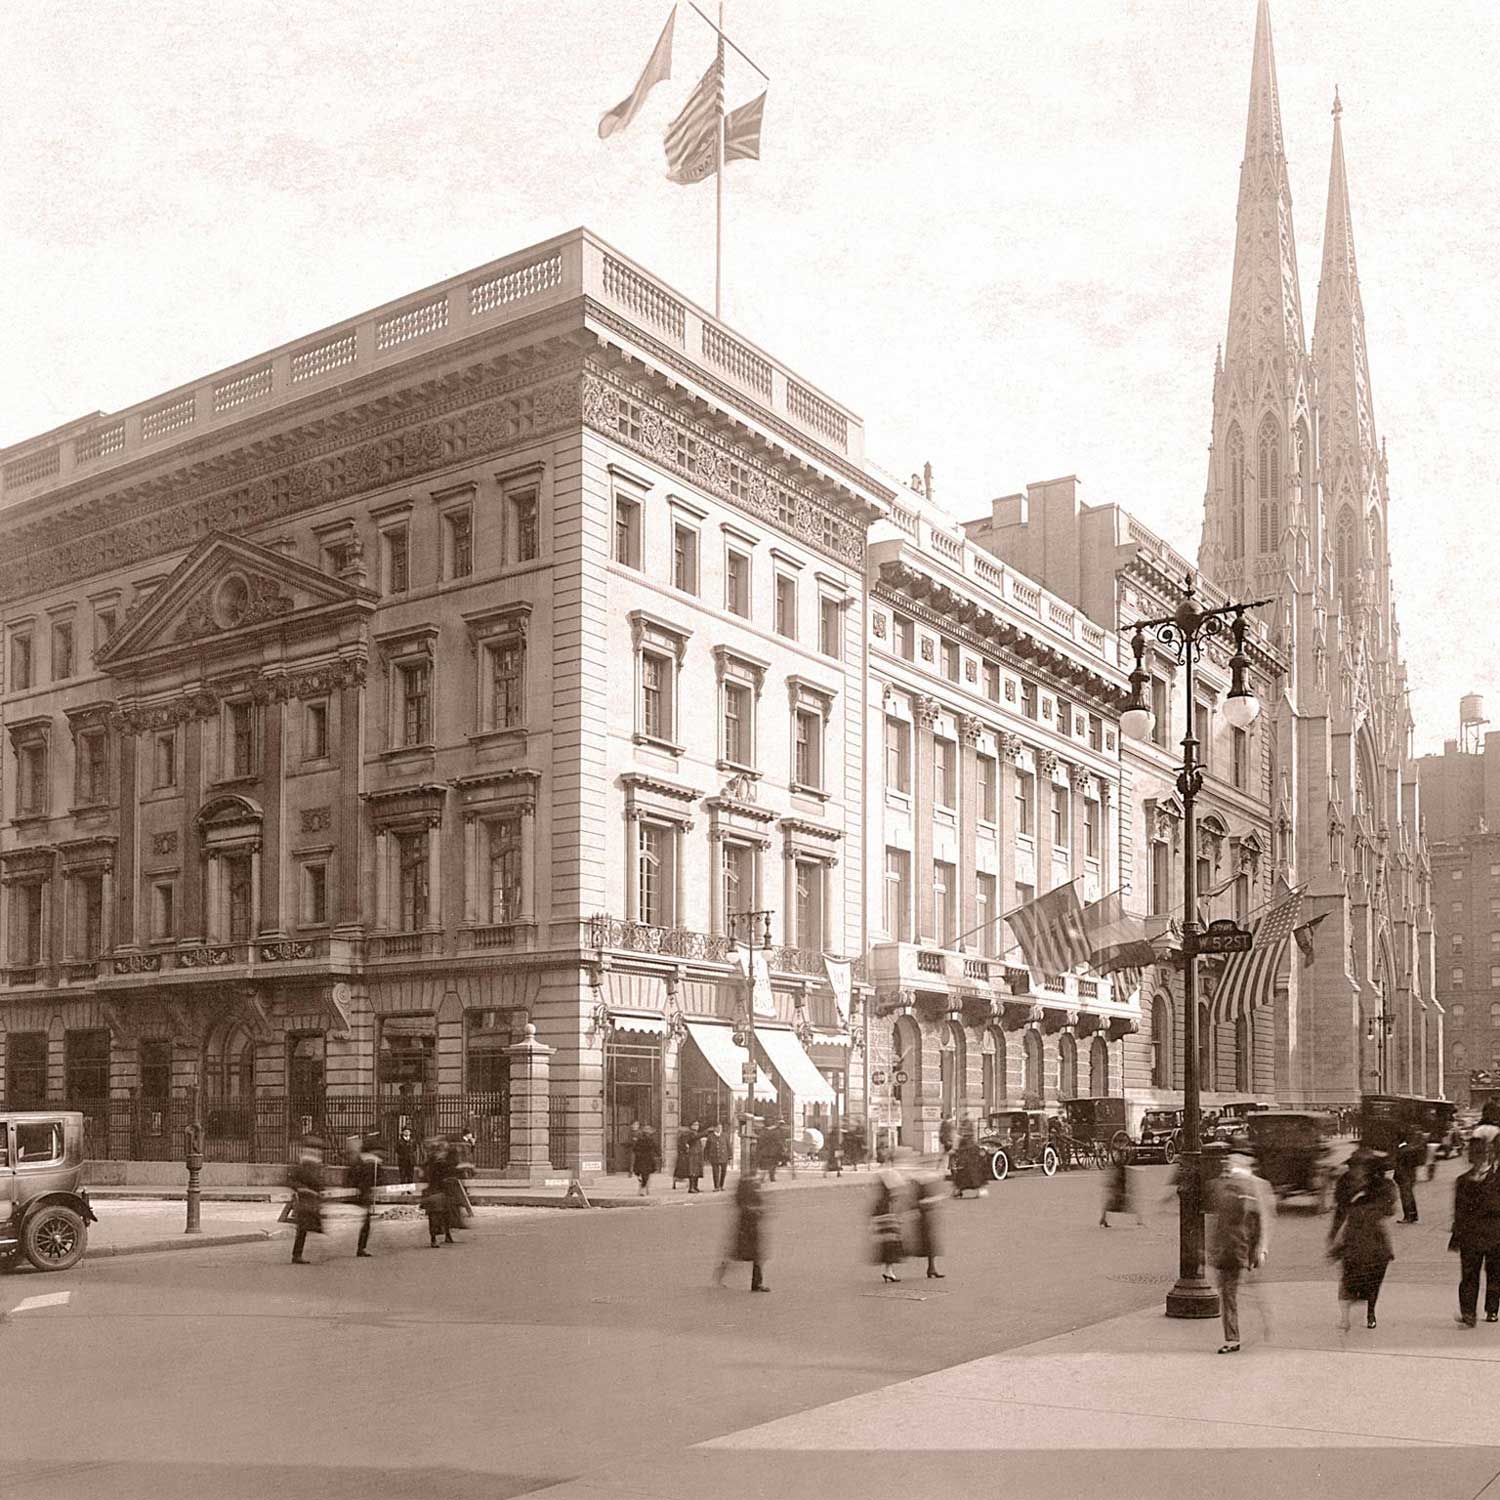 Cartier New York at 653 Fifth Ave, 1918 (image: Cartier)